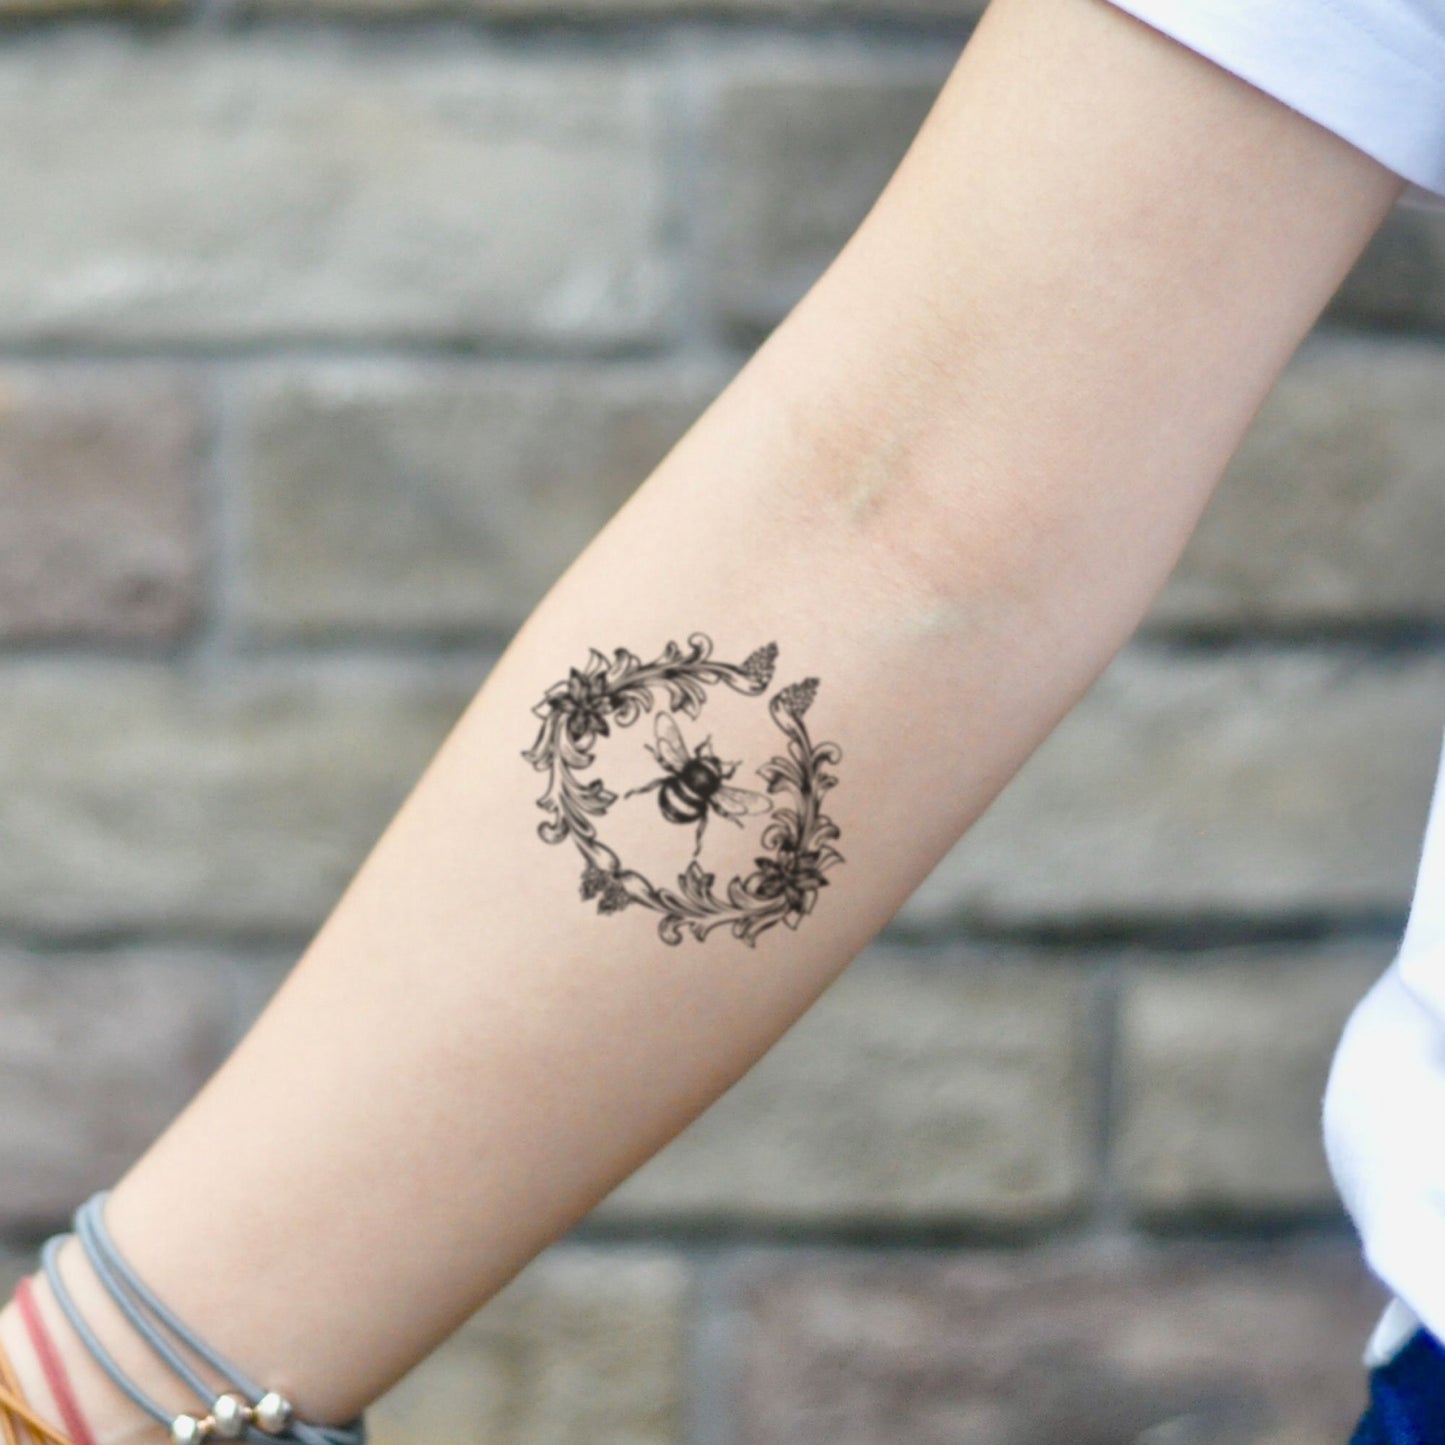 fake small bee and flower nature temporary tattoo sticker design idea on inner arm